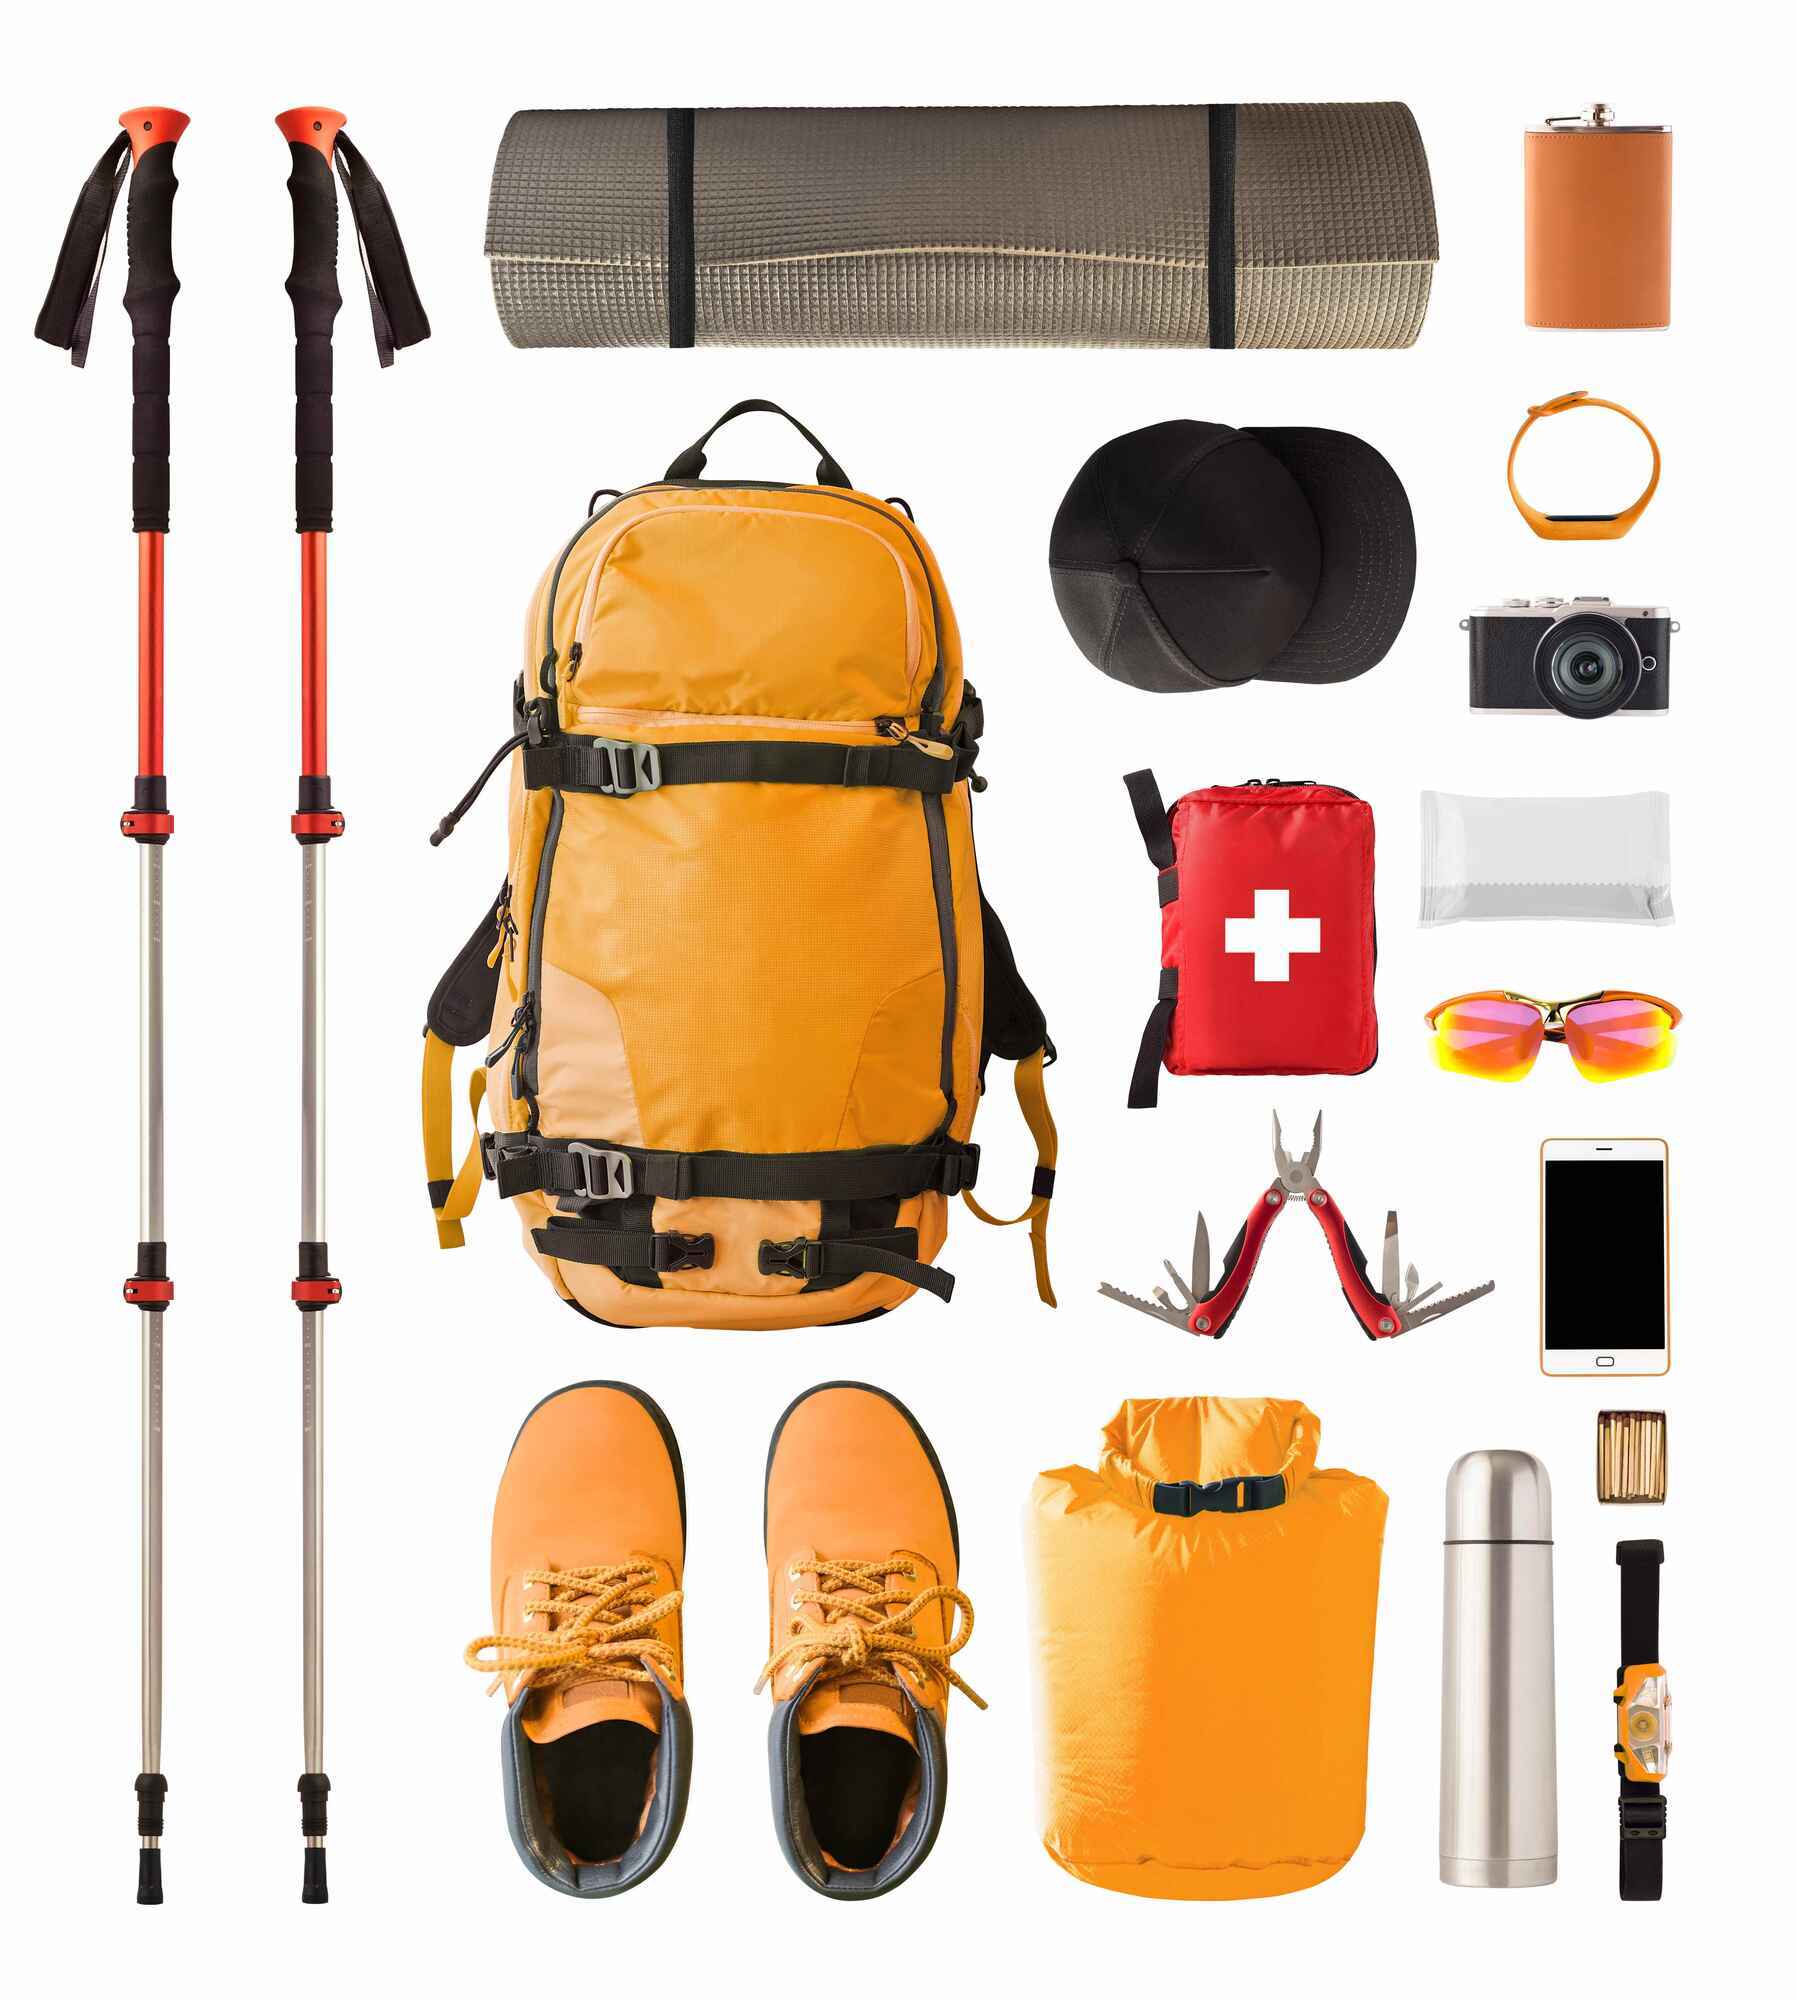 Assorted hiking gear including backpacks, trekking poles, and boots.